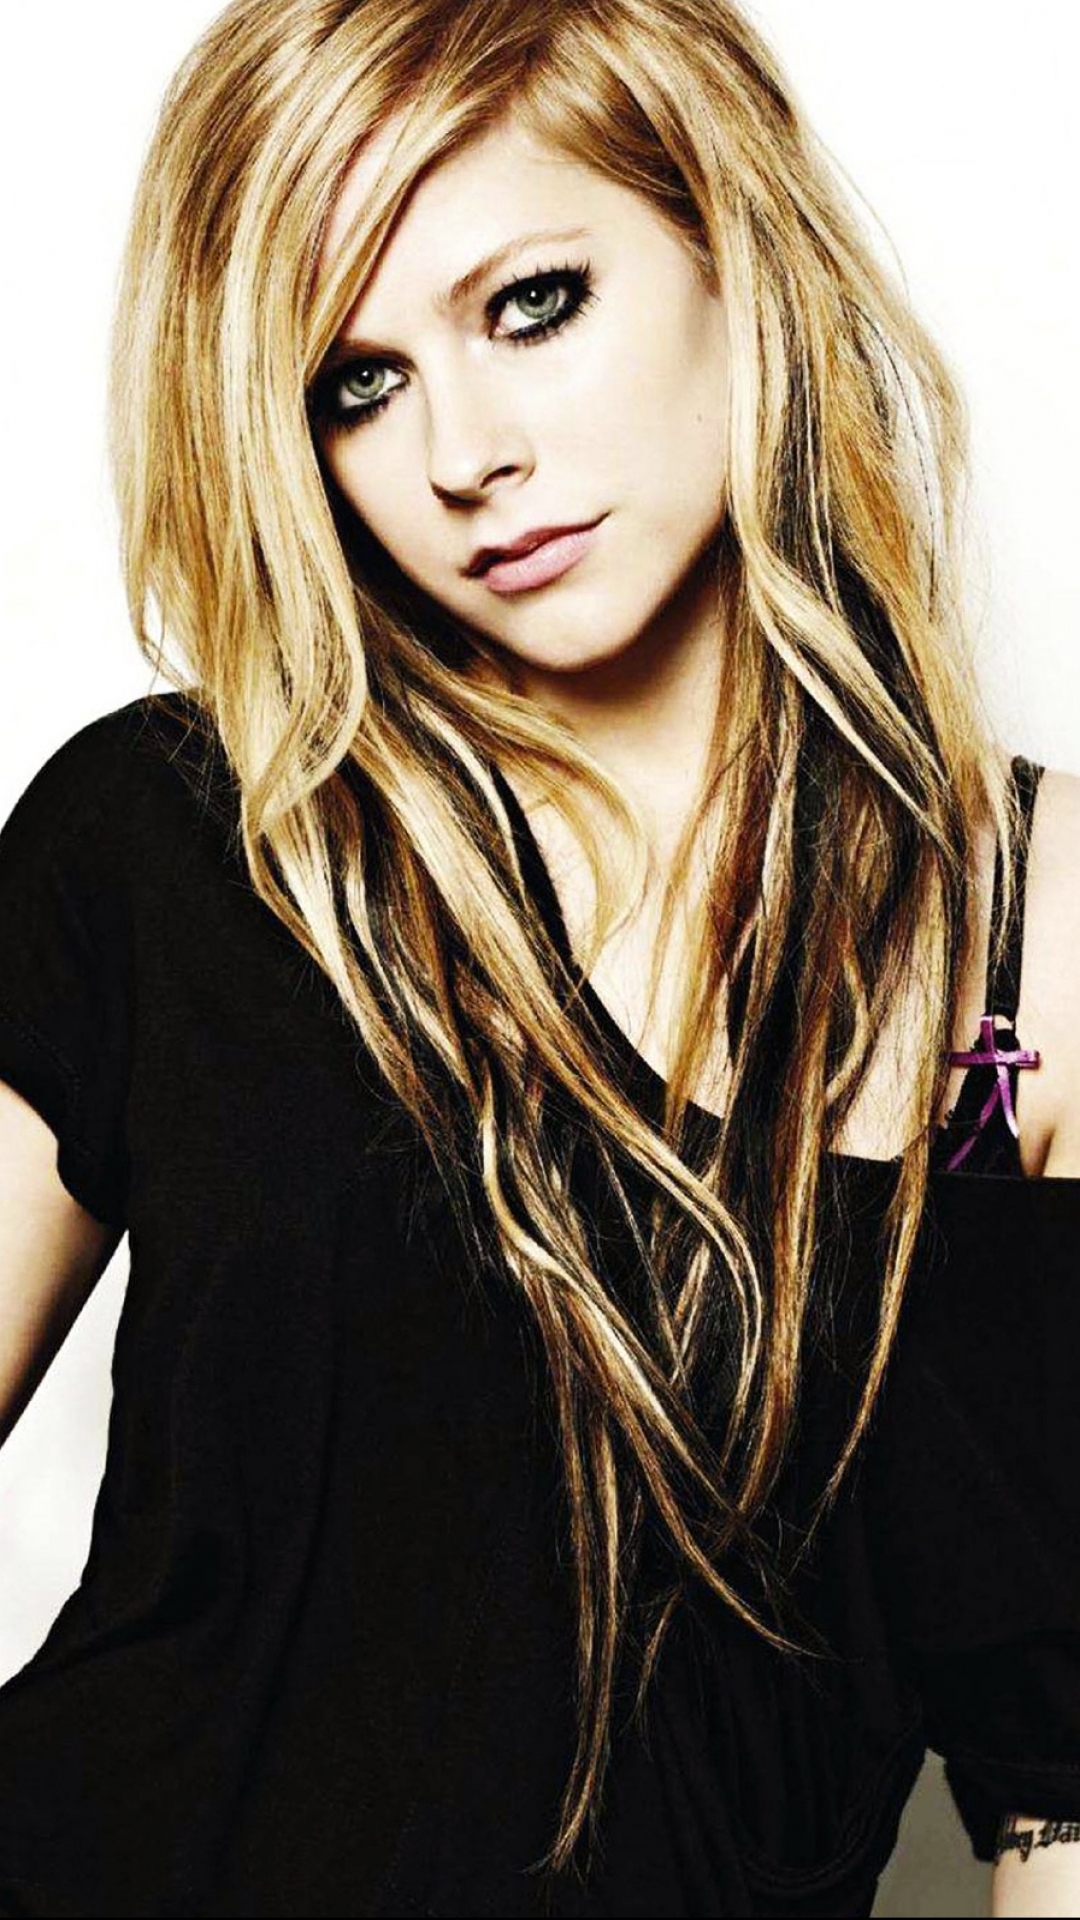 Avril Lavigne Wallpaper Mobile - Mr D From Percy Jackson , HD Wallpaper & Backgrounds